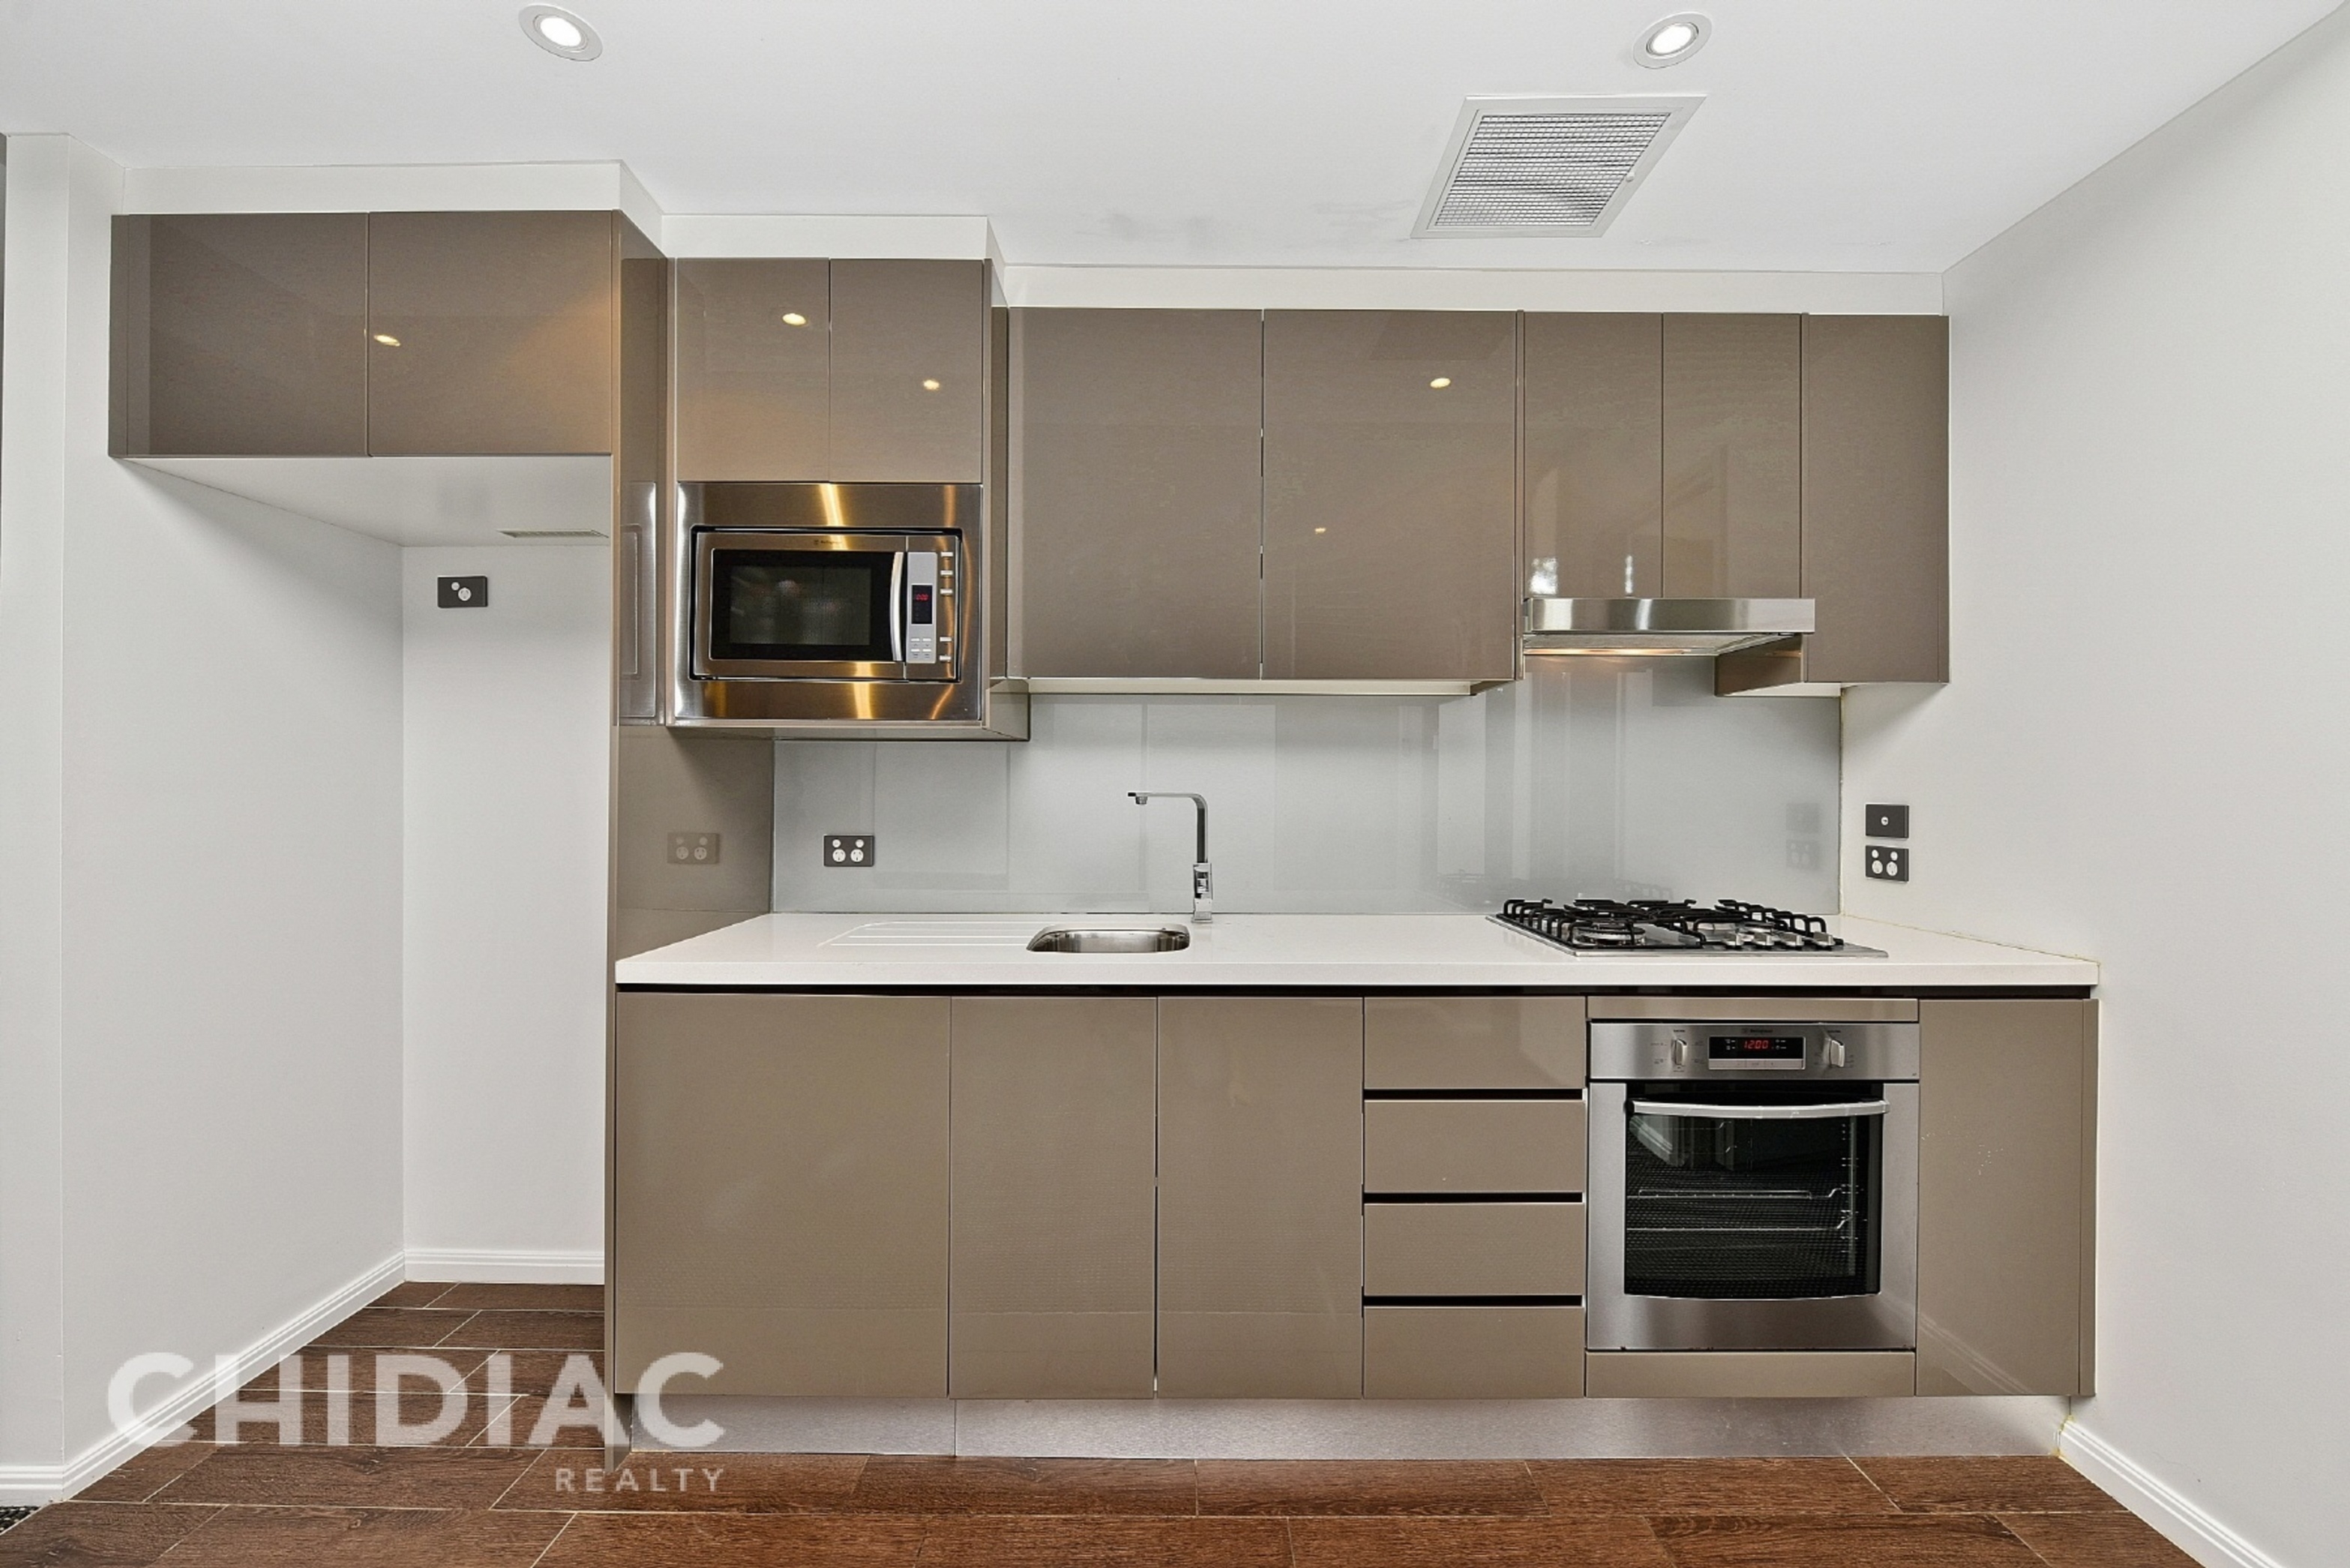 118/5 Alma Road, Macquarie Park Leased by Chidiac Realty - image 3